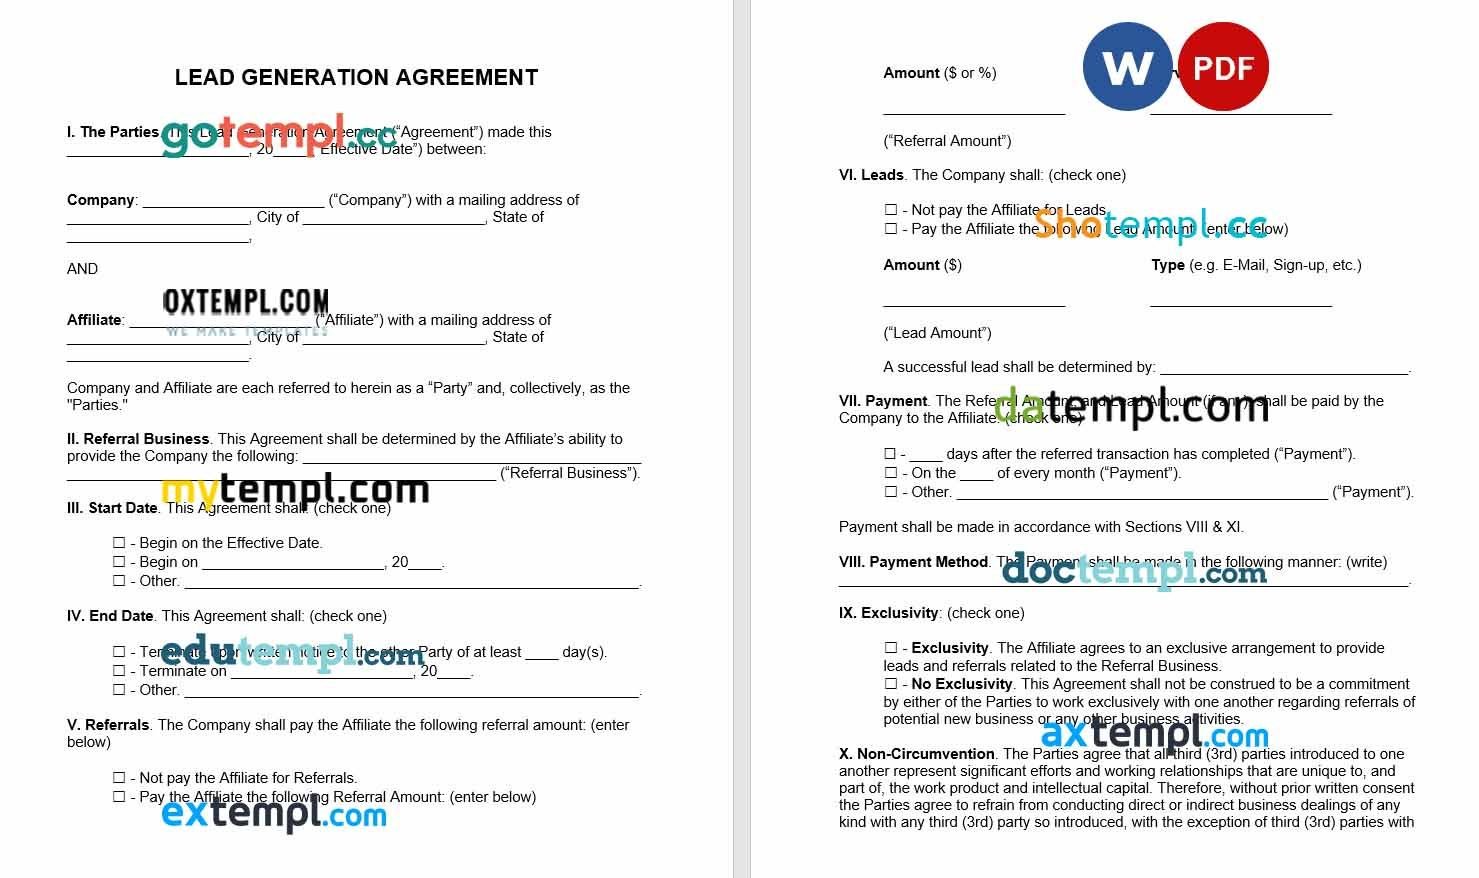 Lead Generation Agreement Word example, fully aditable